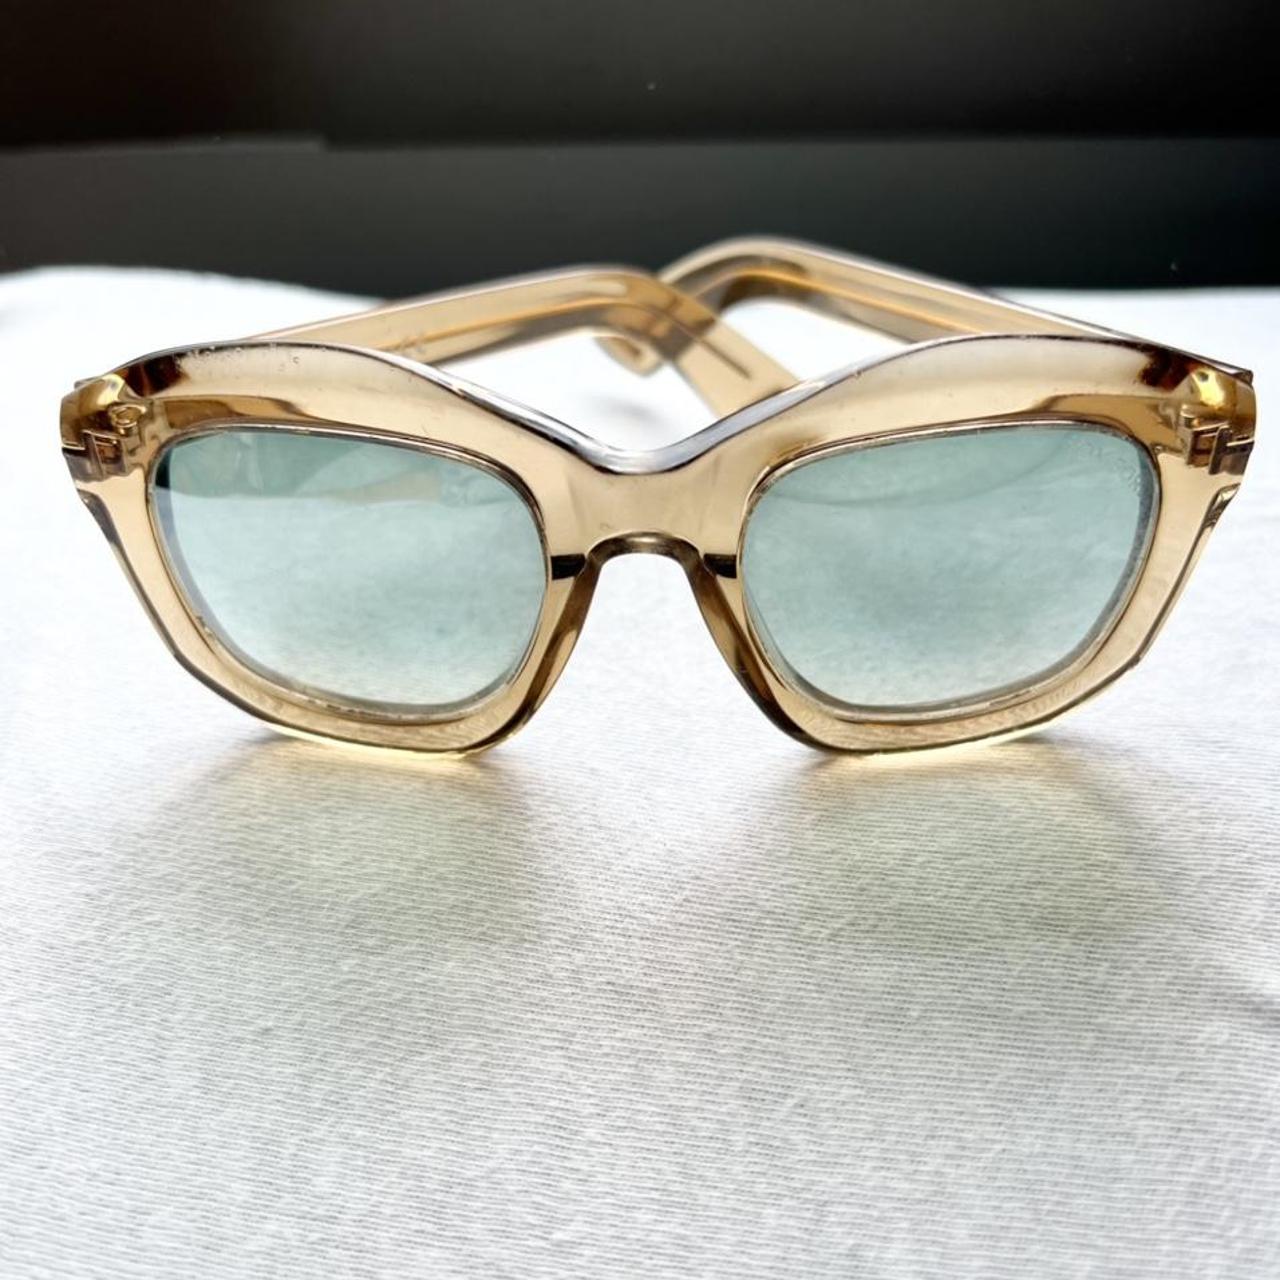 TOM FORD Women's Tan and Blue Sunglasses (3)